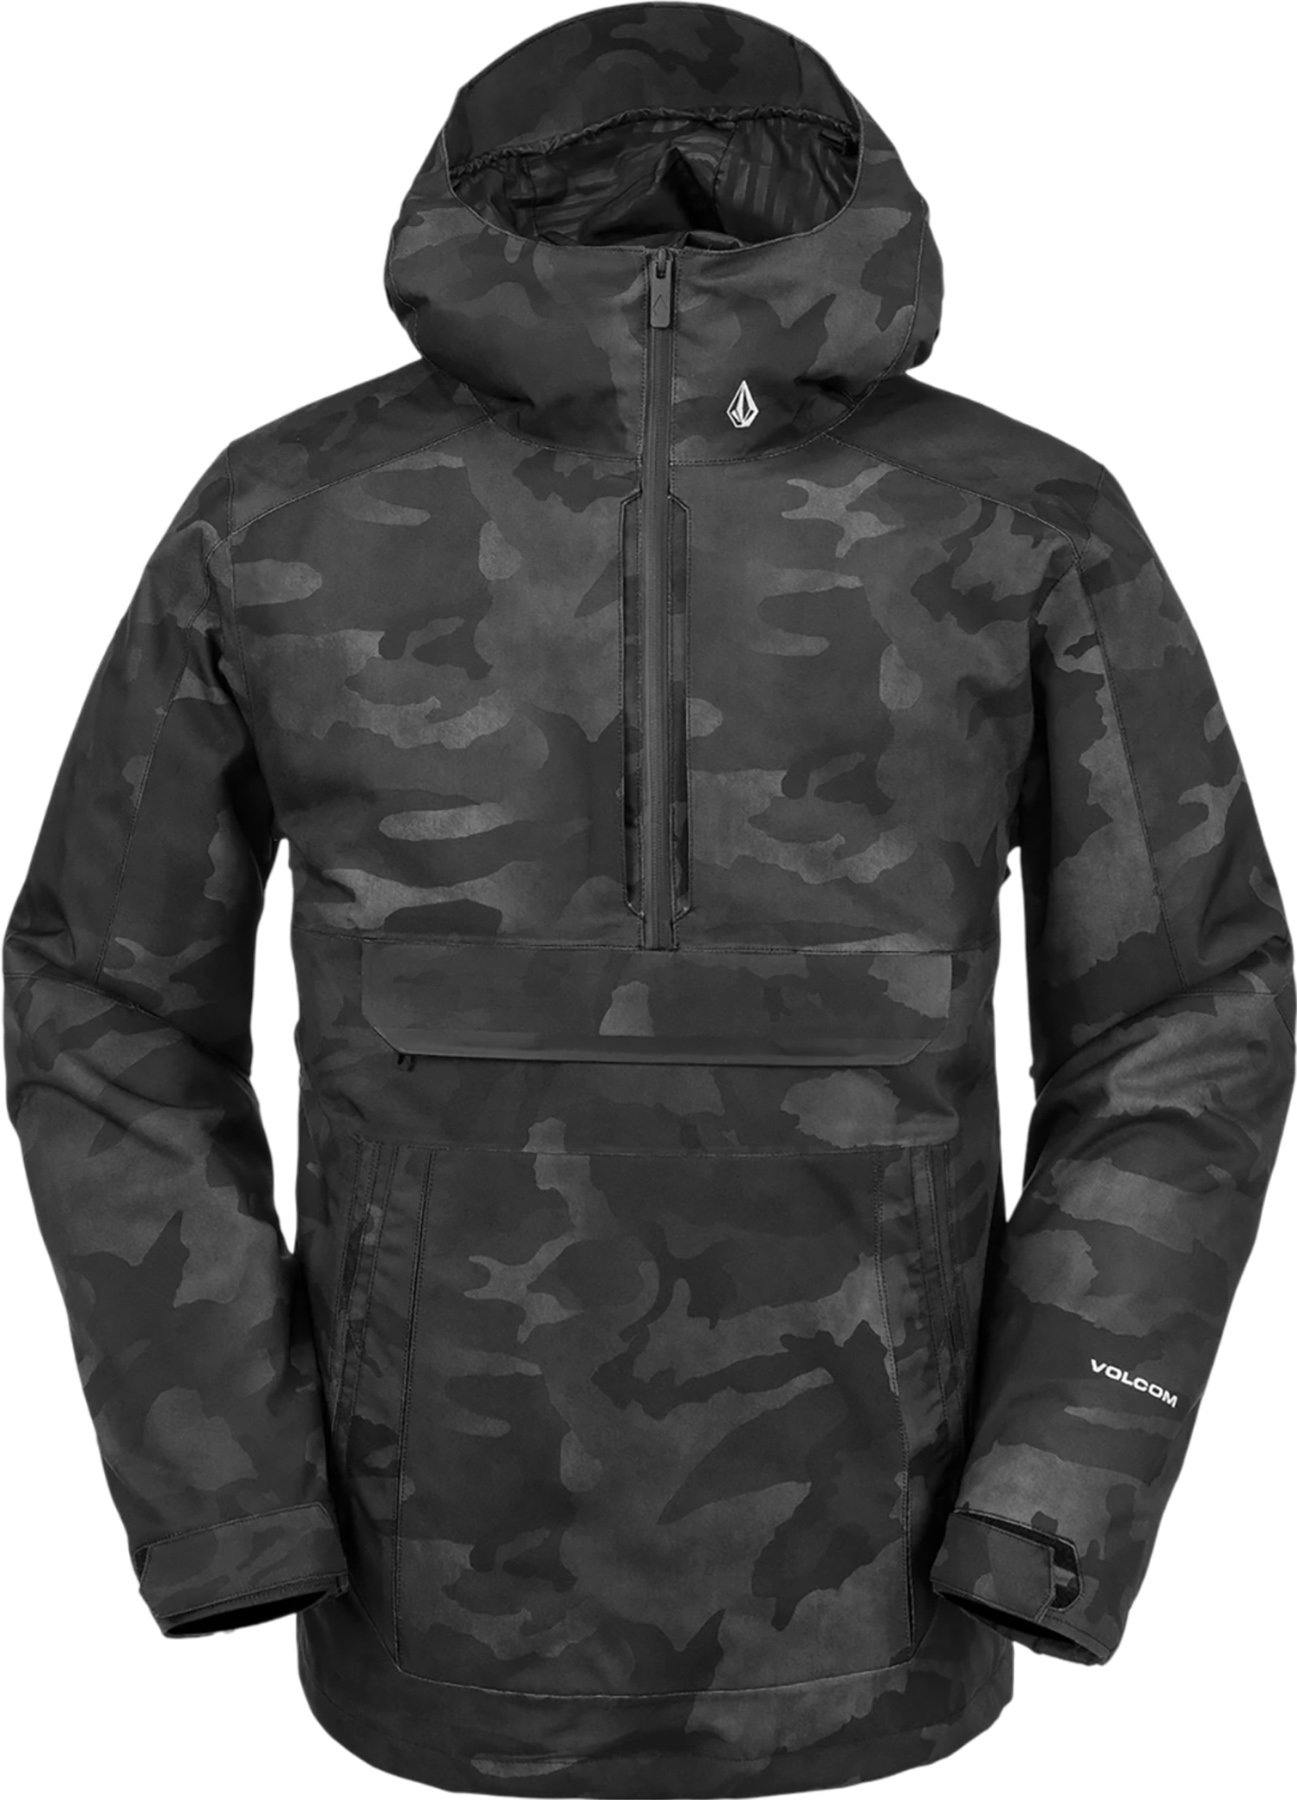 Product image for Brighton Snow Jacket - Men's